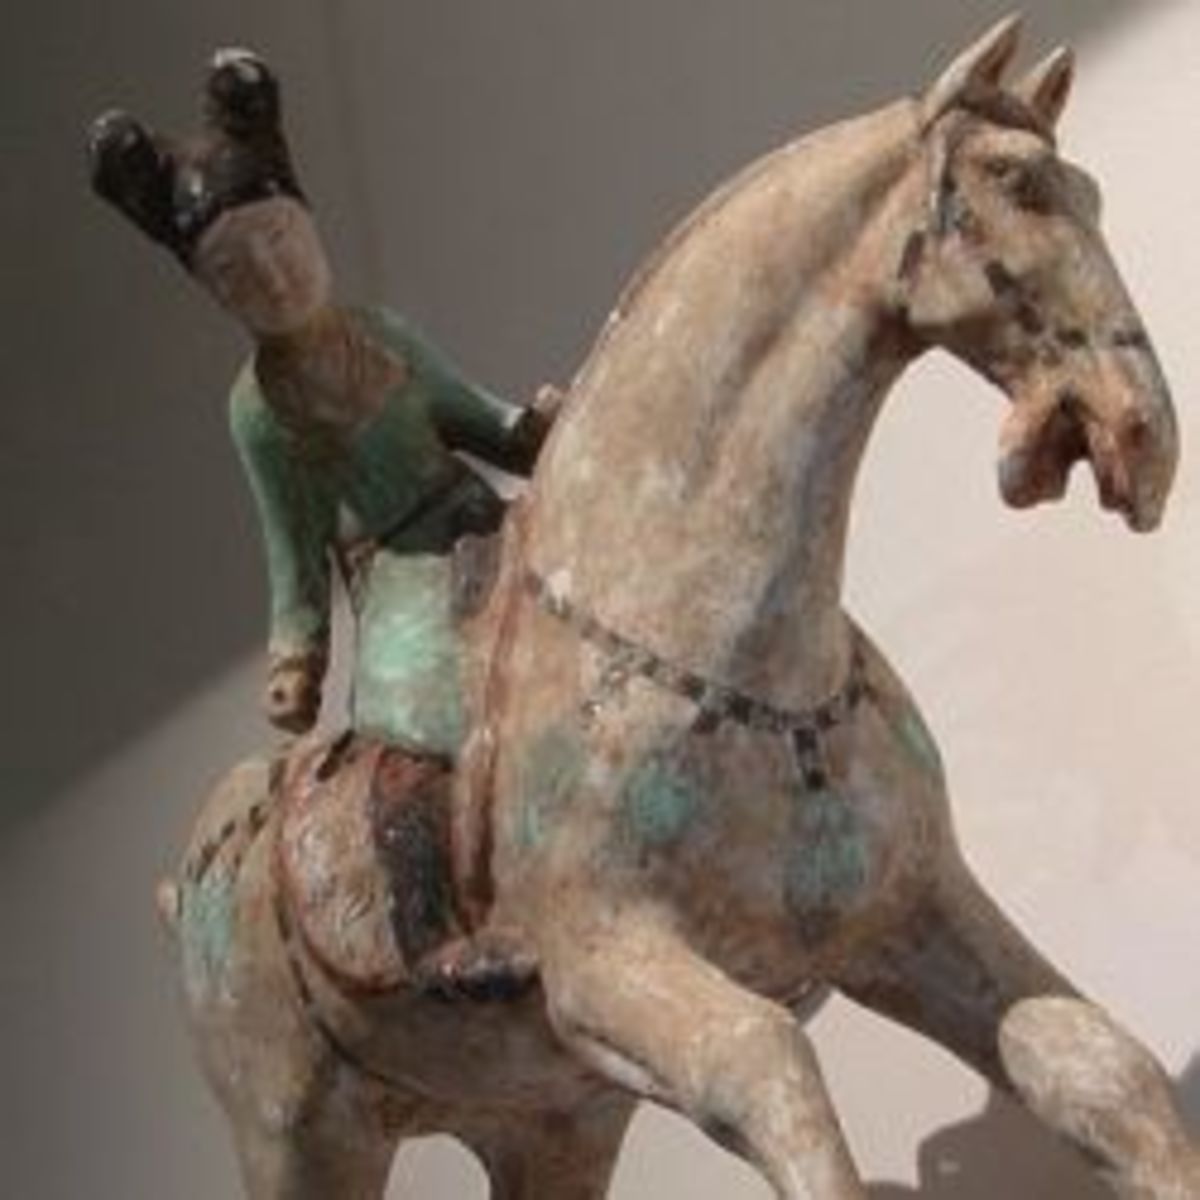 Polo was played in China during the Tang Dynasty. 